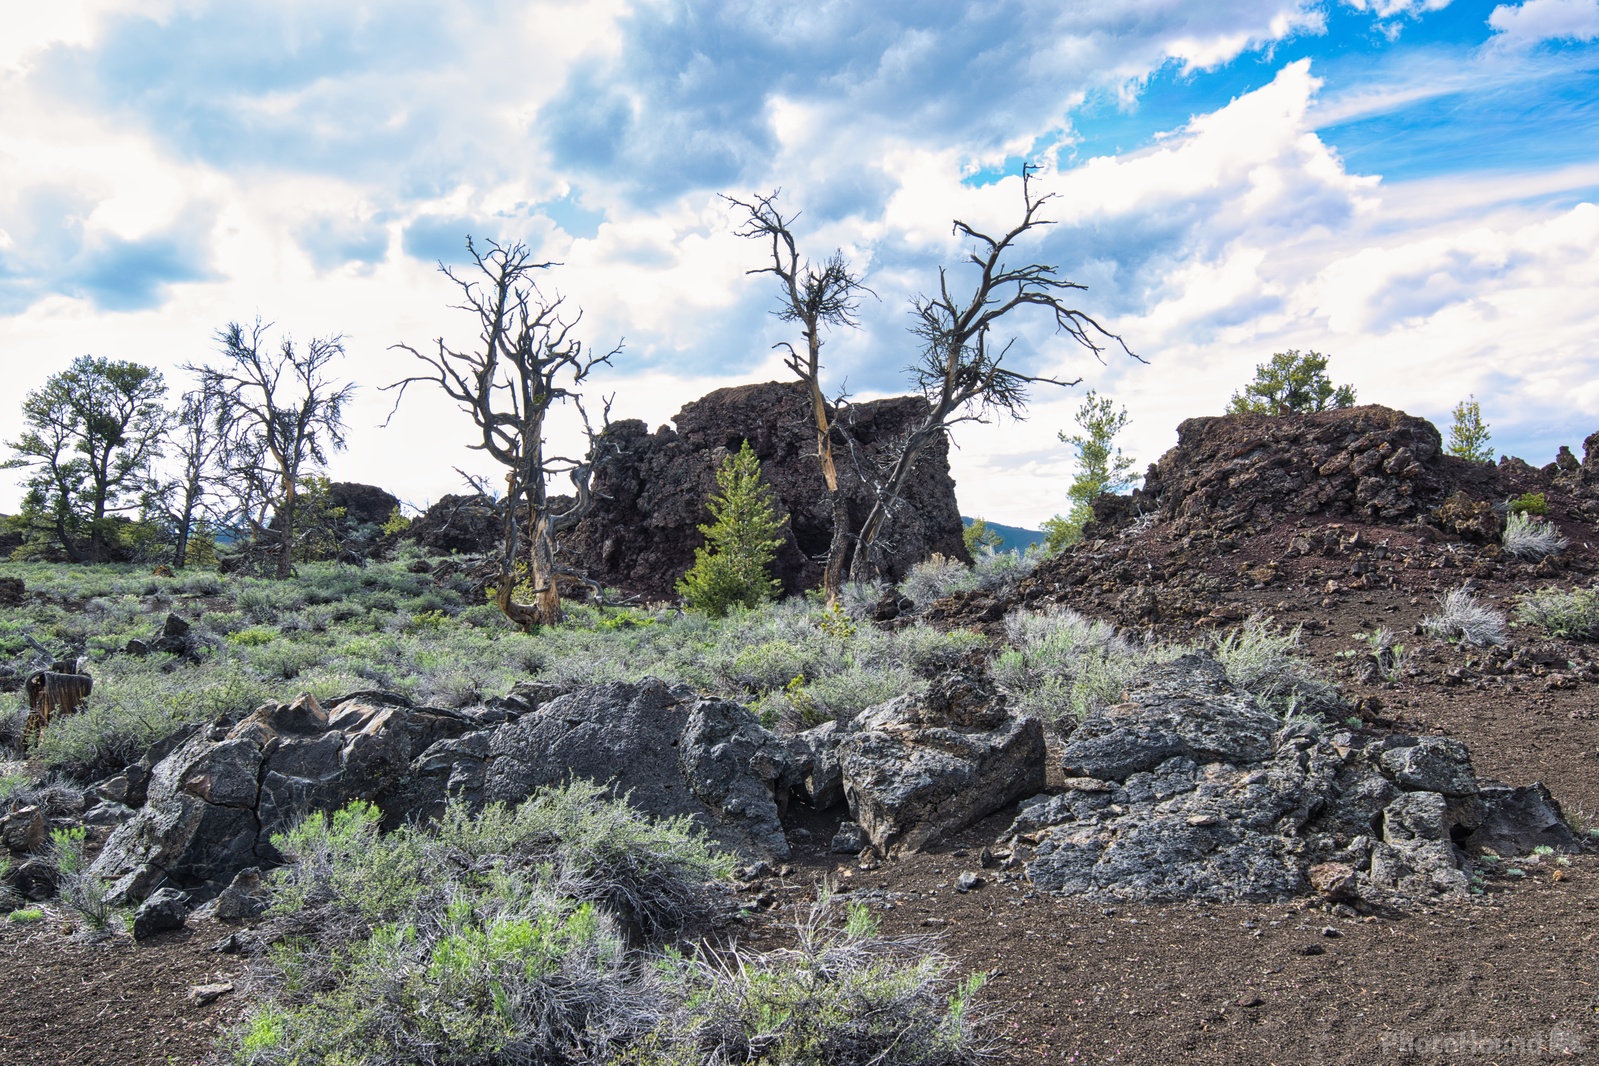 Image of Craters of the Moon by Steve West